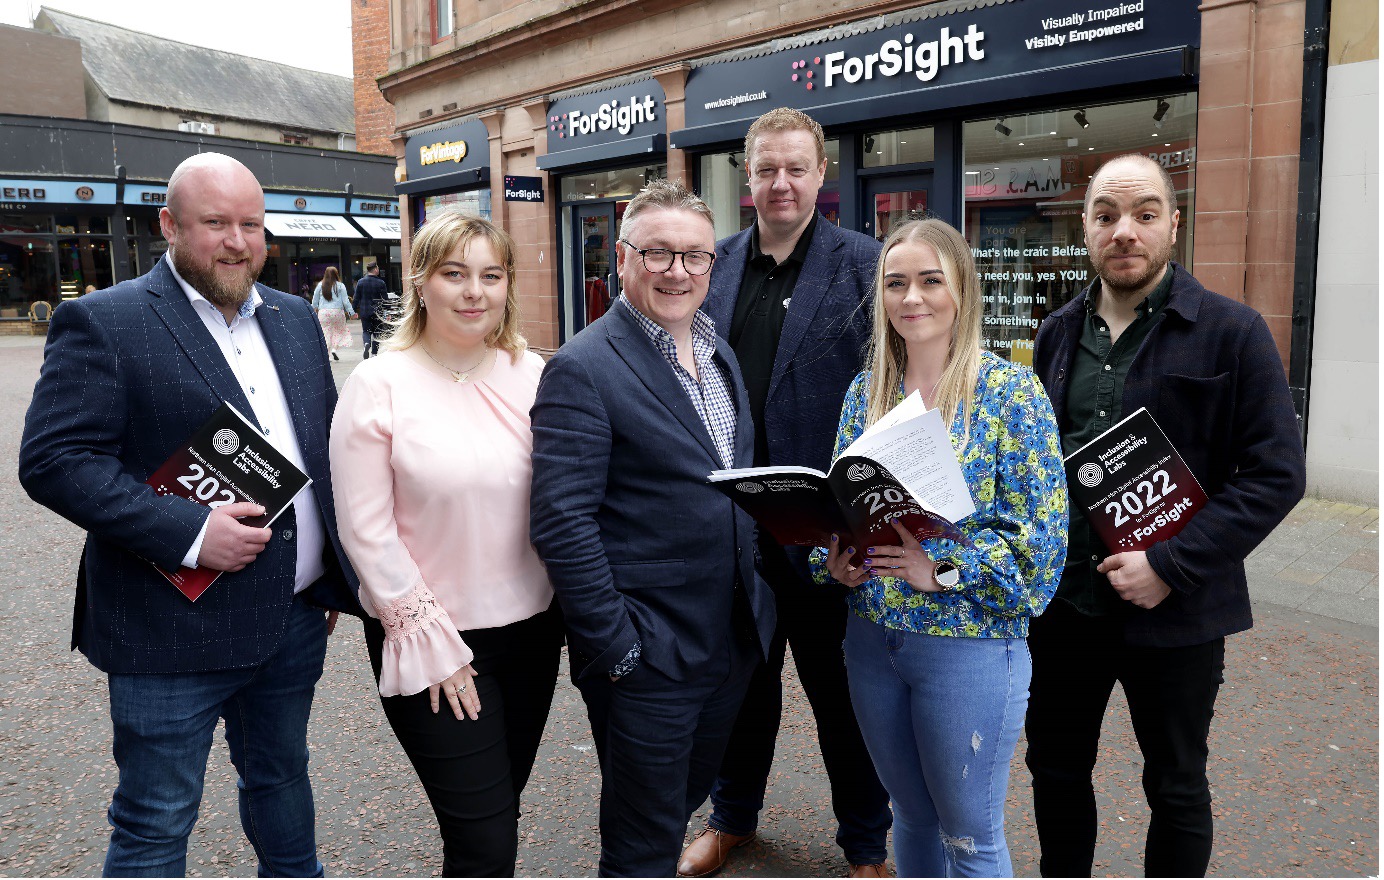 Sean Doran, Adela Buliman, Chris White. Kyran O'Mahoney, Amanda McClure, and Robbie Best holding the NI DAI Report in front of a ForSight shop.